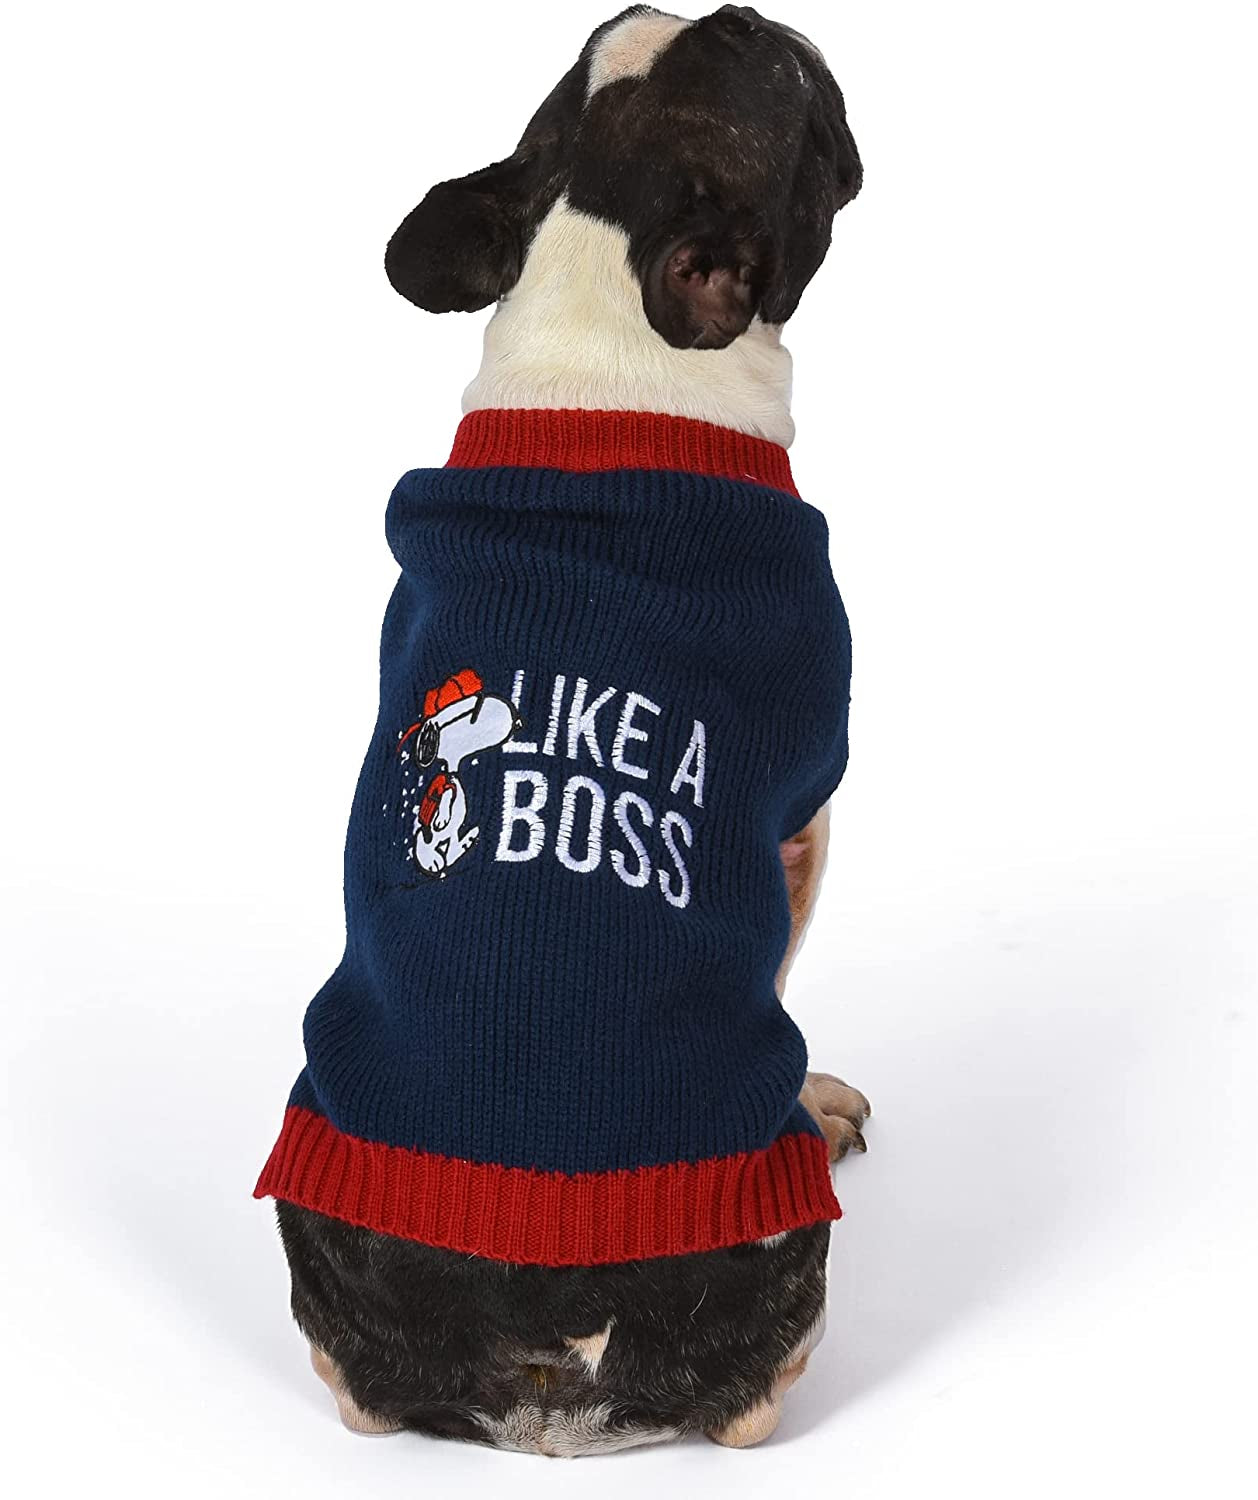 Peanuts for Pets Snoopy "Like a Boss" Dog Sweater, Medium | Soft and Comfortable Dog Apparel Dog Clothing Dog Shirt | Peanuts Snoopy Medium Dog Sweater, Medium Dog Shirt for Medium Dogs